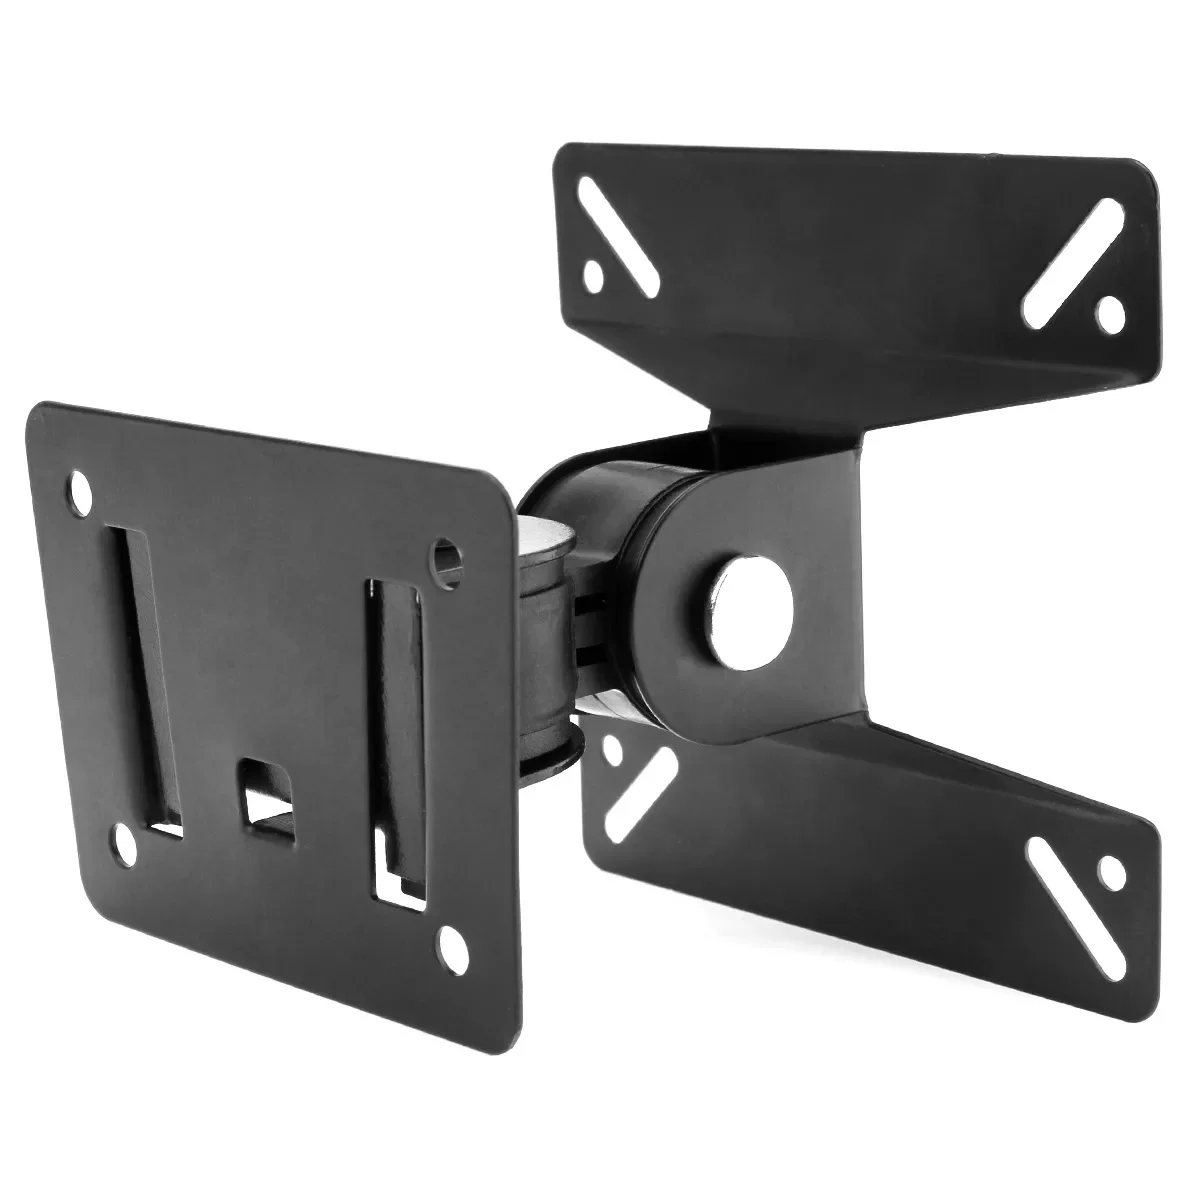 

Universal Adjustable 0.28KG TV Wall Mount Bracket Support 180 Degrees Rotation for 14 - 24 Inch LCD LED Flat Panel TV